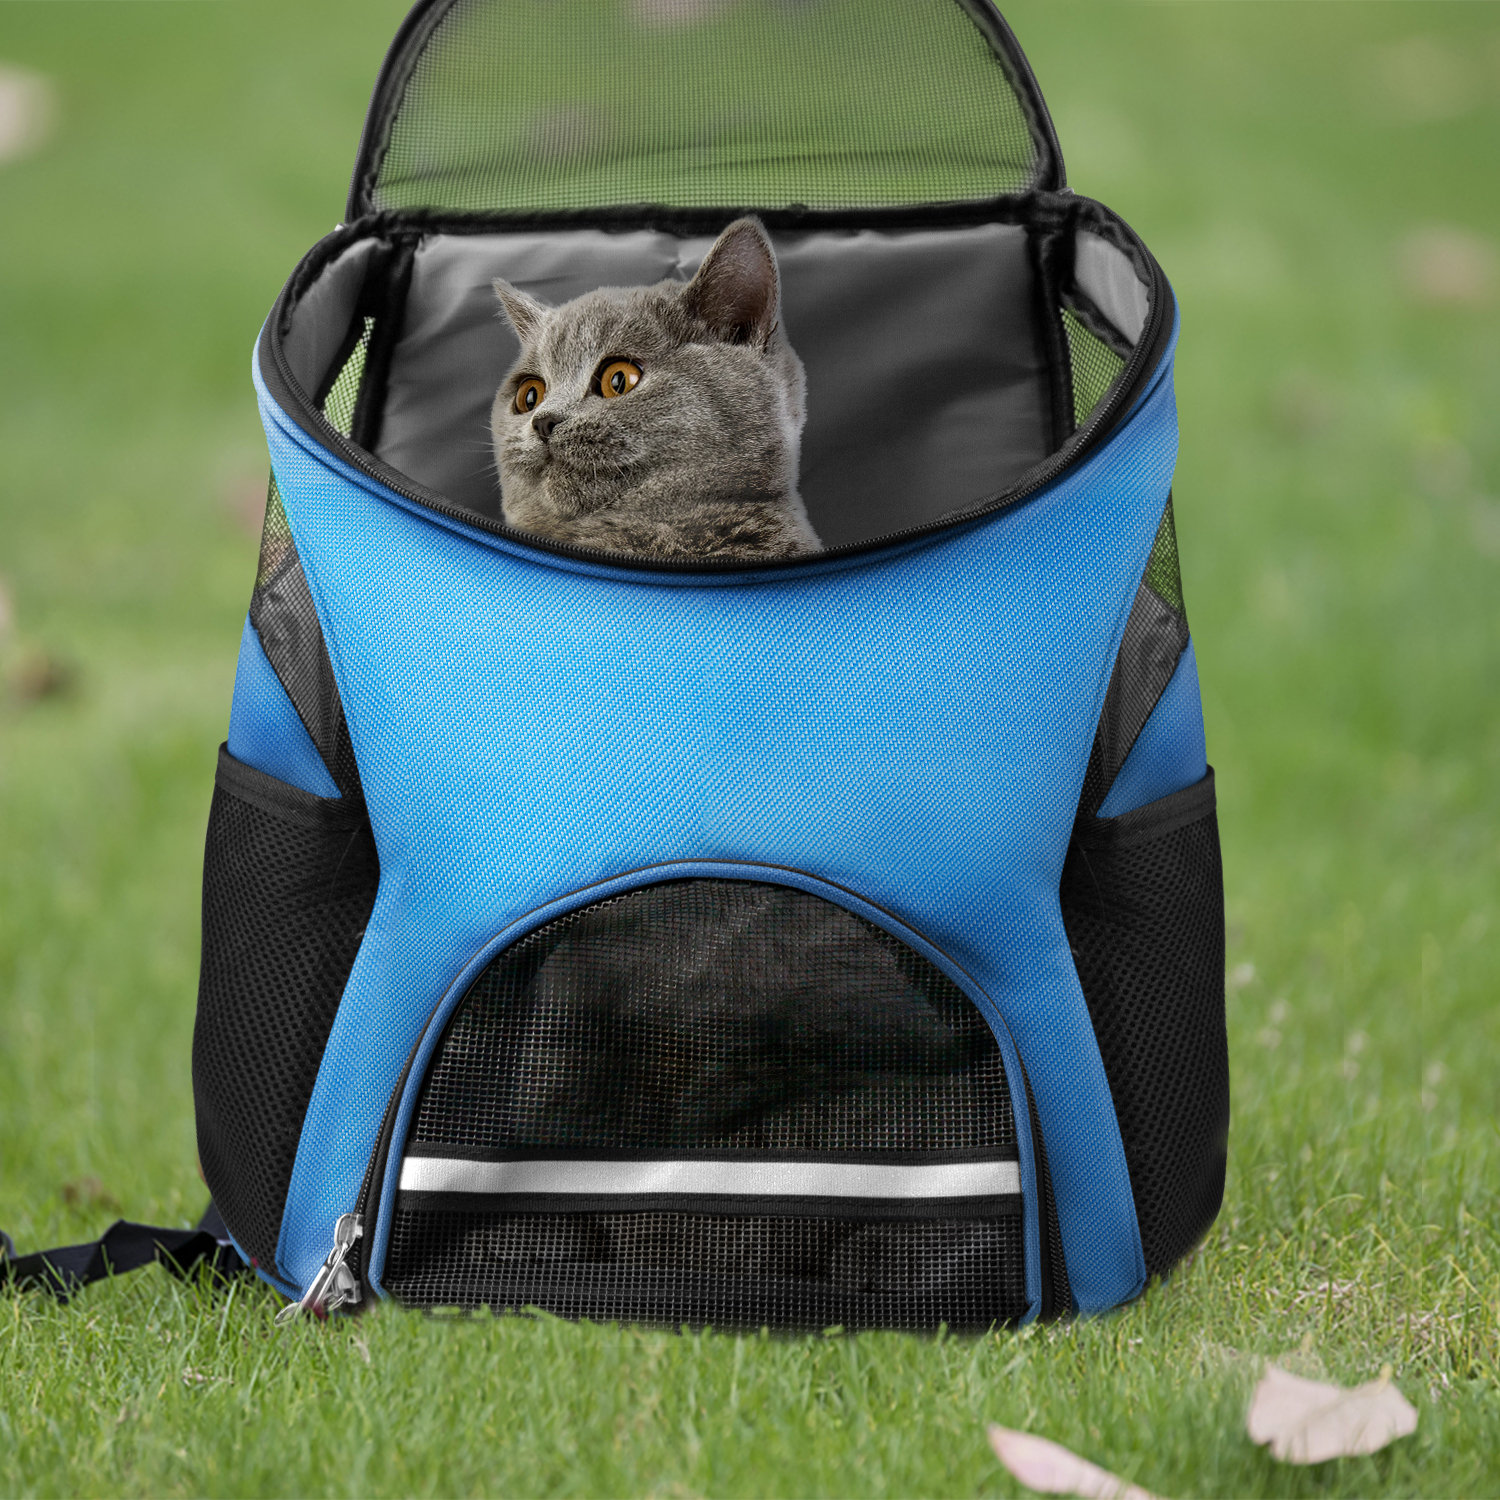 Pet Carrier Backpack For Cats, Dogs And Small Animals, Portable Pet Travel  Carrier, Super Ventilated Design, Airline Approved, Ideal For